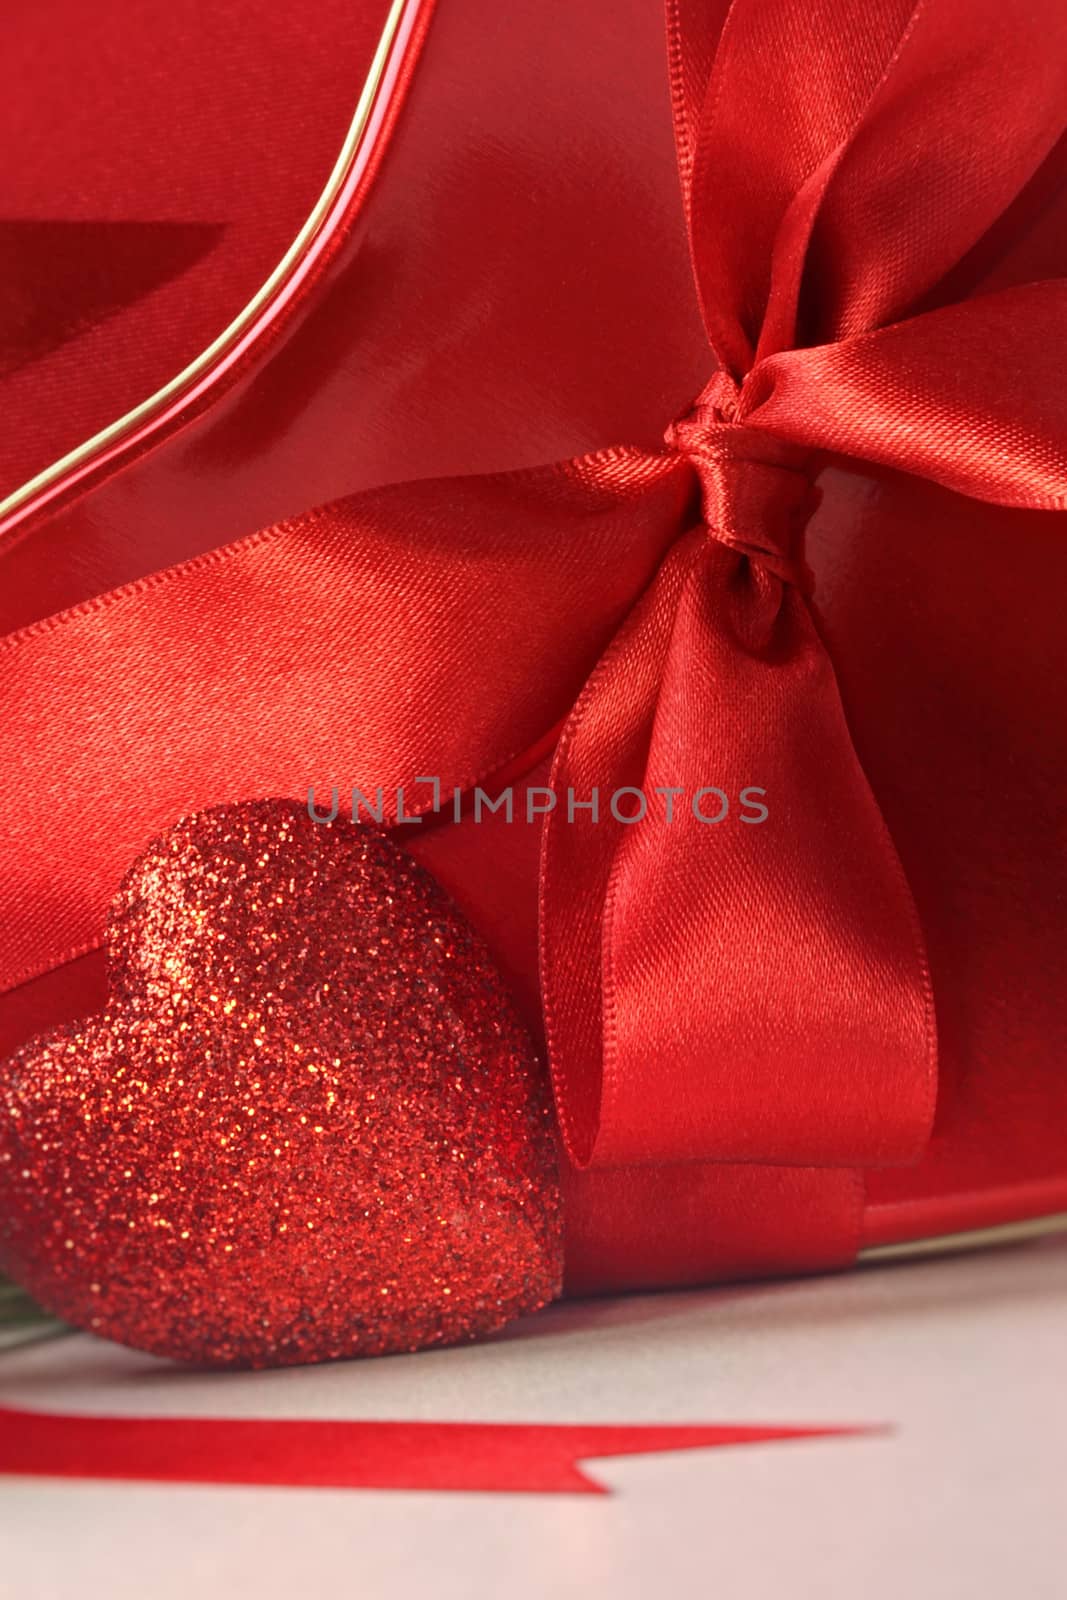 Closeup of hearts and red ribbons by Sandralise